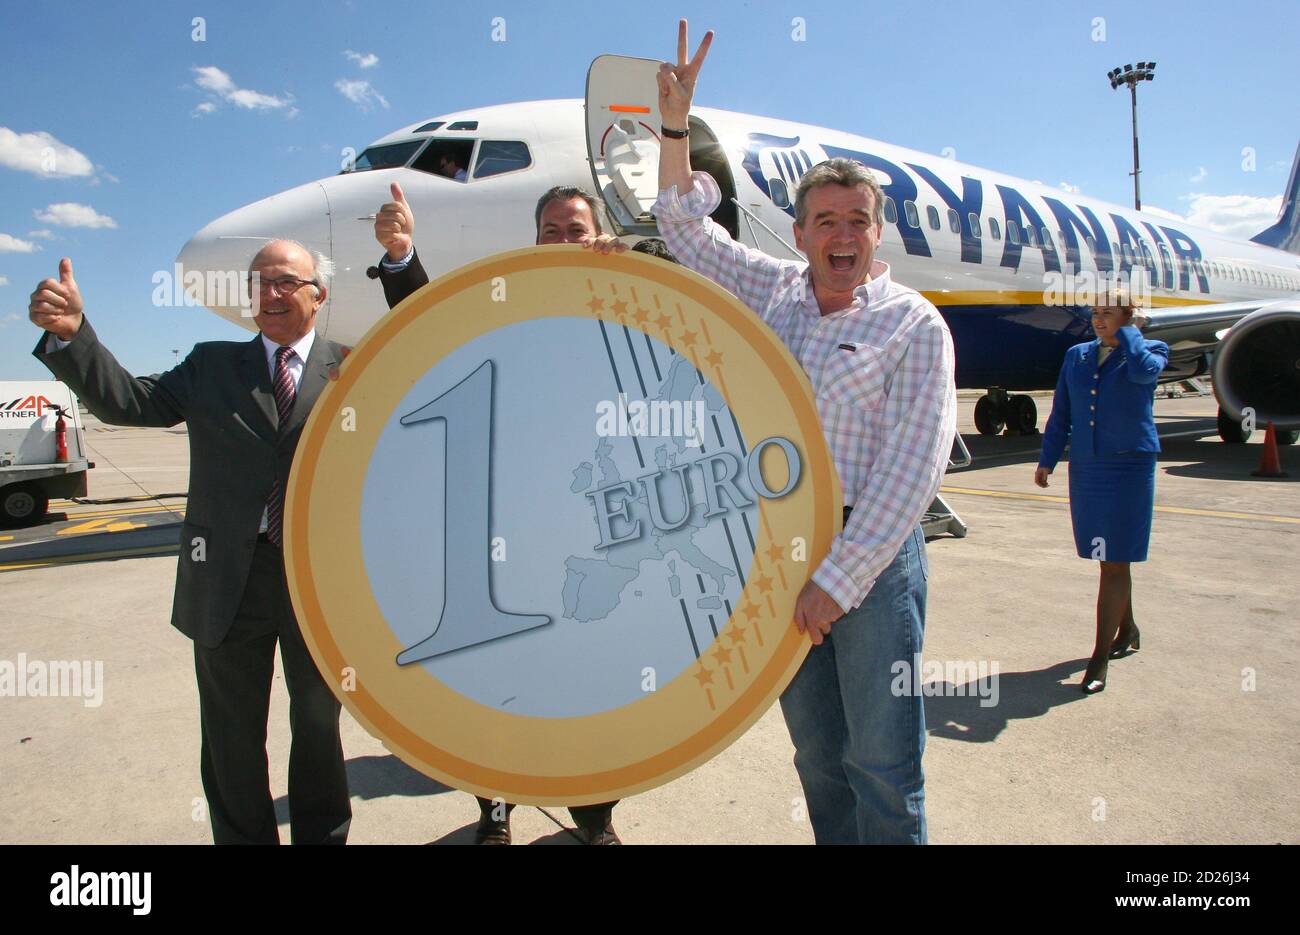 Michael O'Leary (R), chief executive of Irish low-fare airline Ryanair,  accompanied by Marseille-Marignane airport president Jean-Francois Bigay  (L) and marketing director Philippe Wilmart (C), flashes a victory sign in  front of a